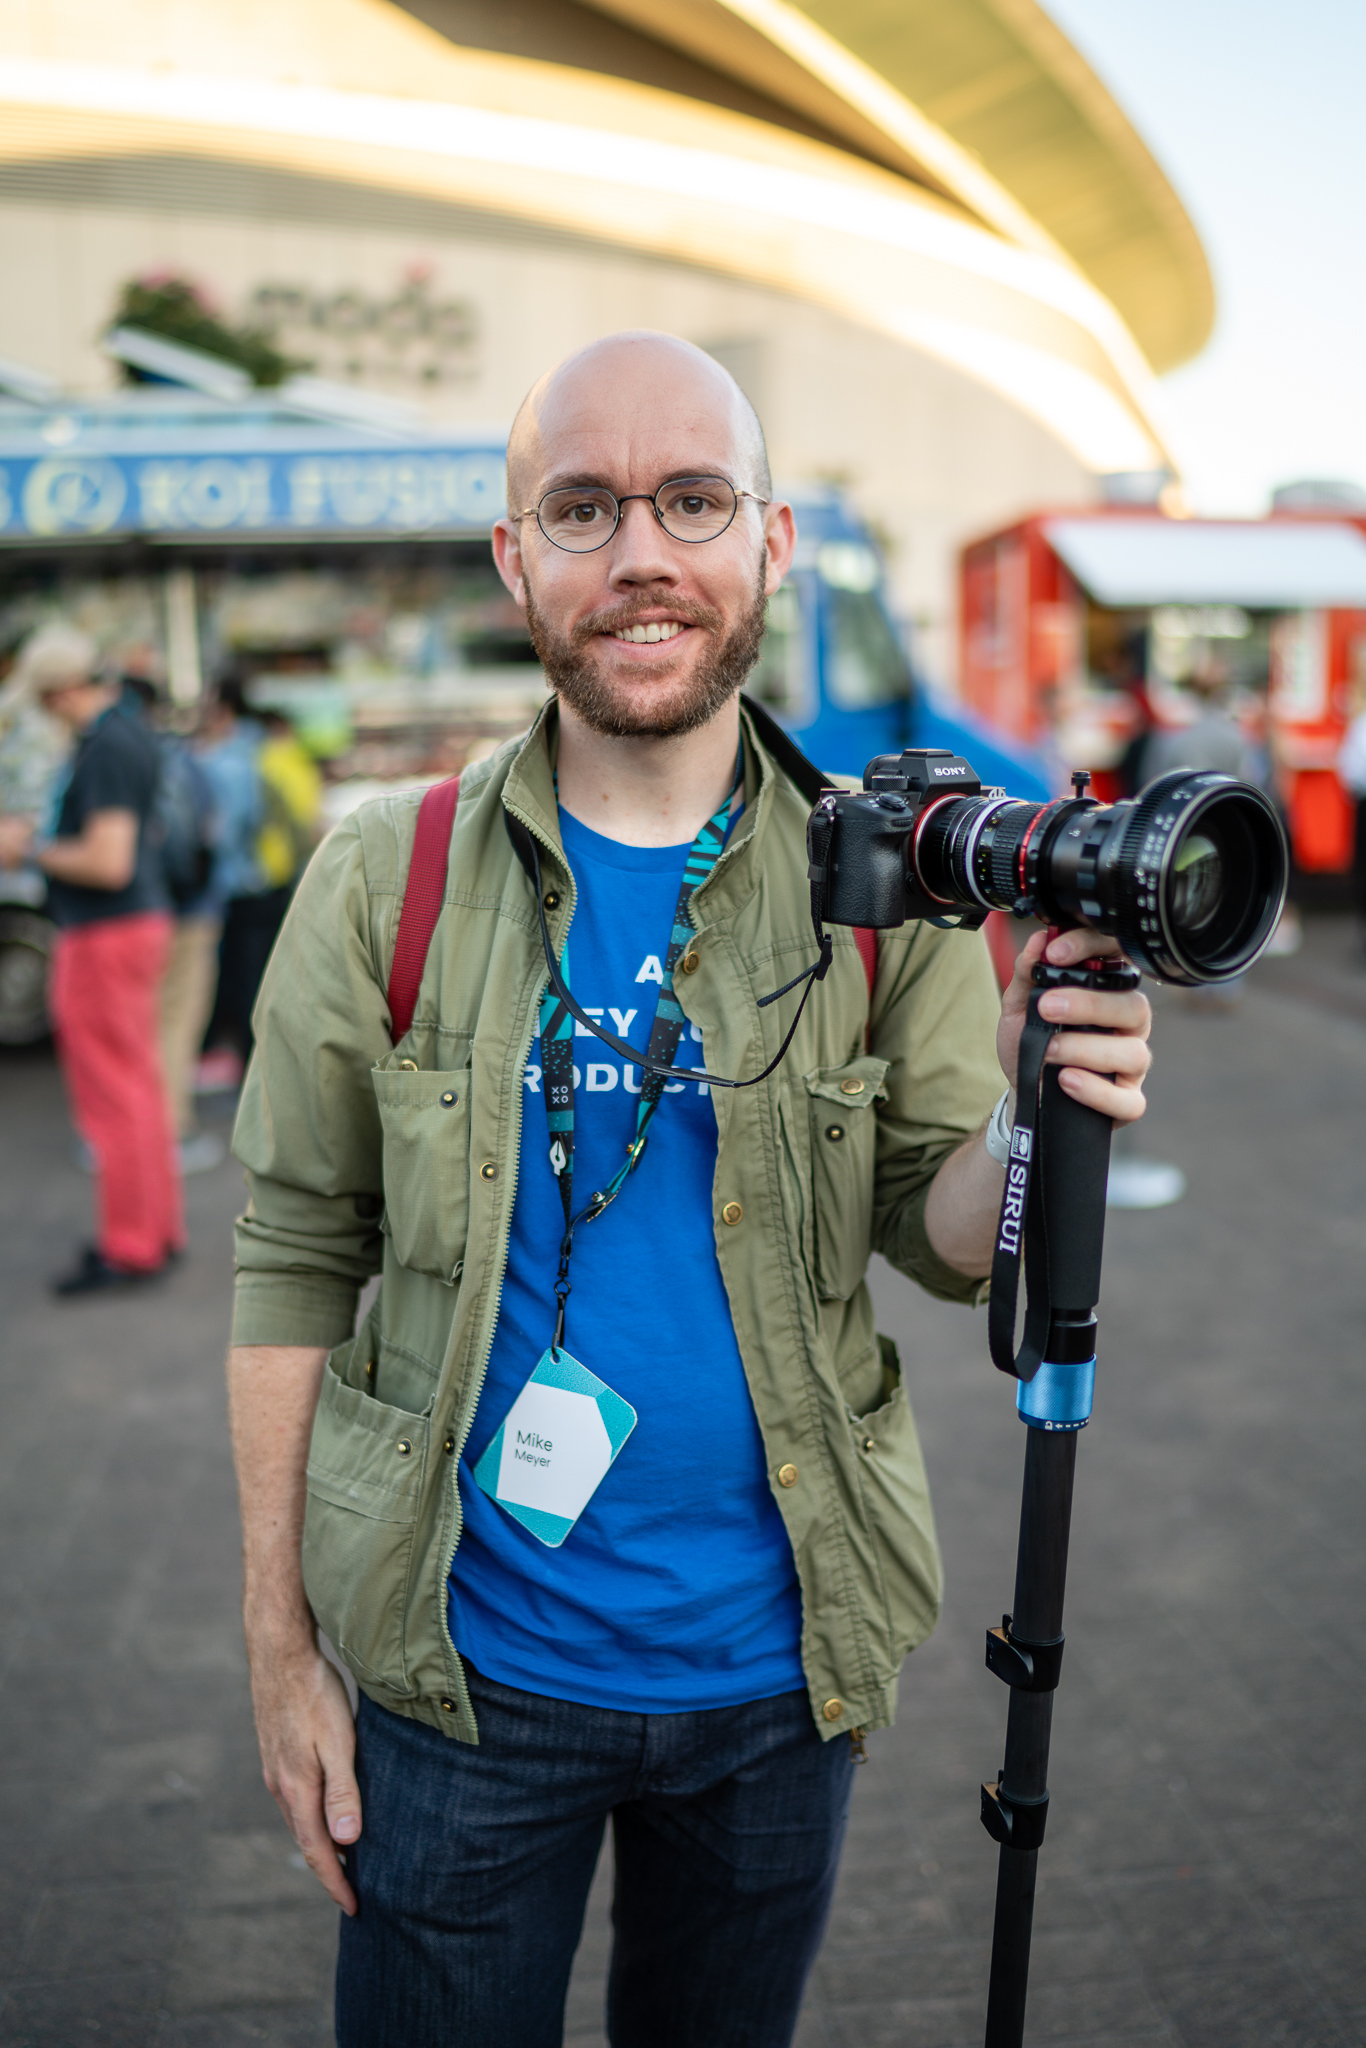 Portrait of me, a bald guy in a blue t-shirt and a green jacket. I’m standing and smiling at the camera. In my left hand I’m holding a monopod like a staff. Atop the monopod is a Sony mirrorless camera with a comically large anamorphic lens.